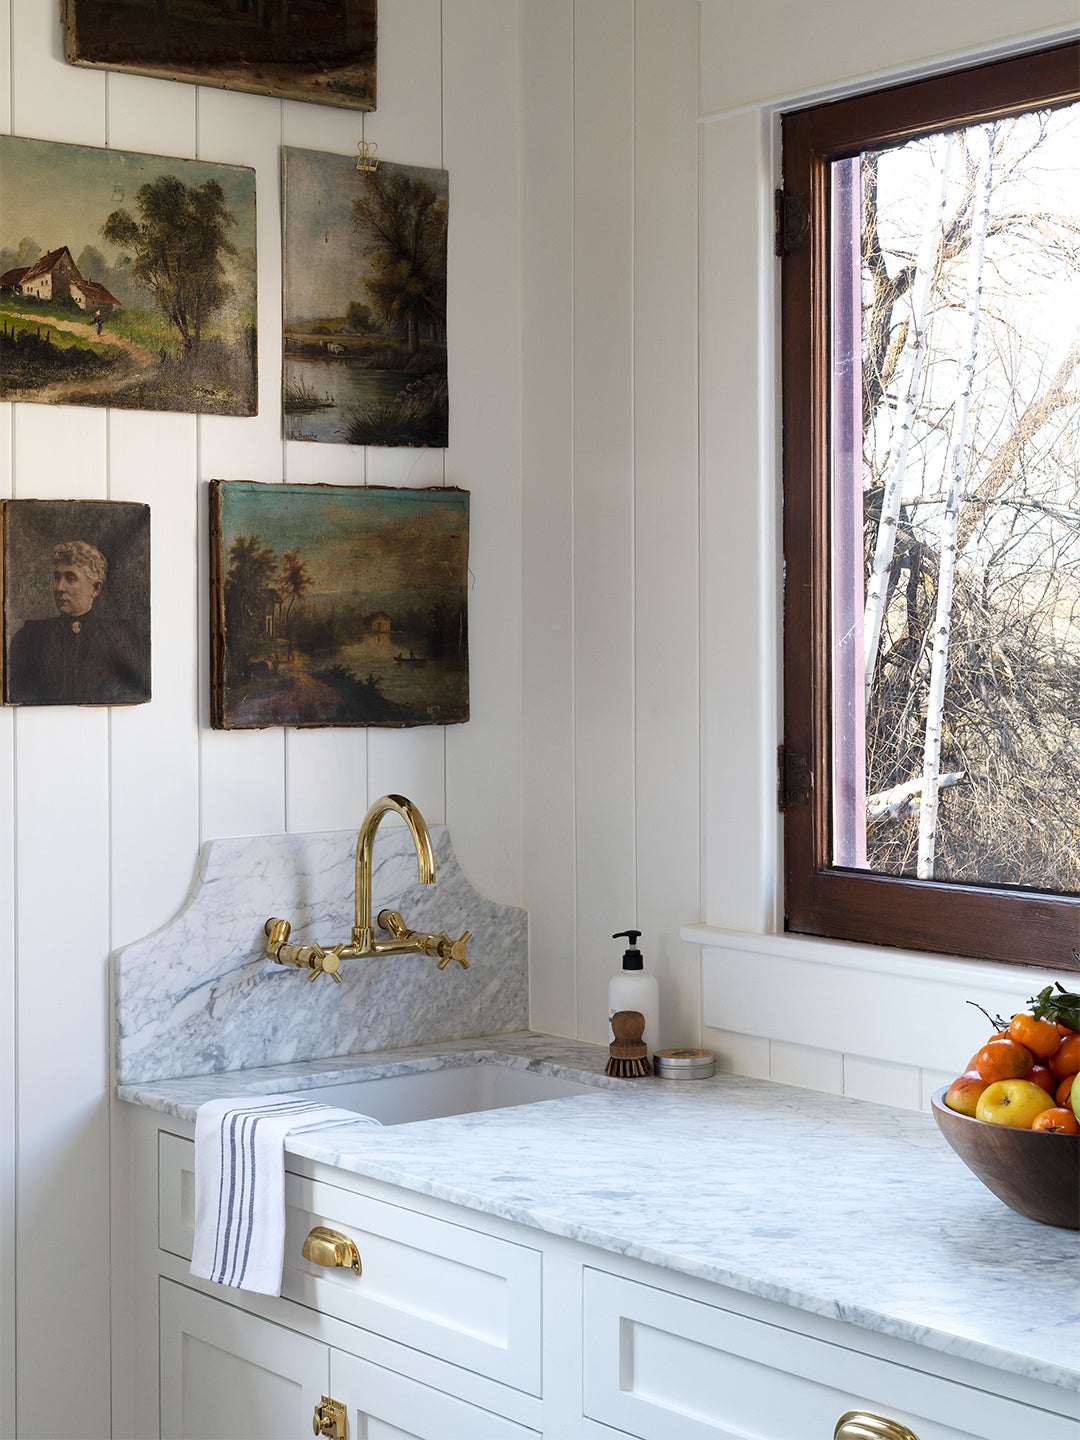 marble countertop with oil paintings on the wall